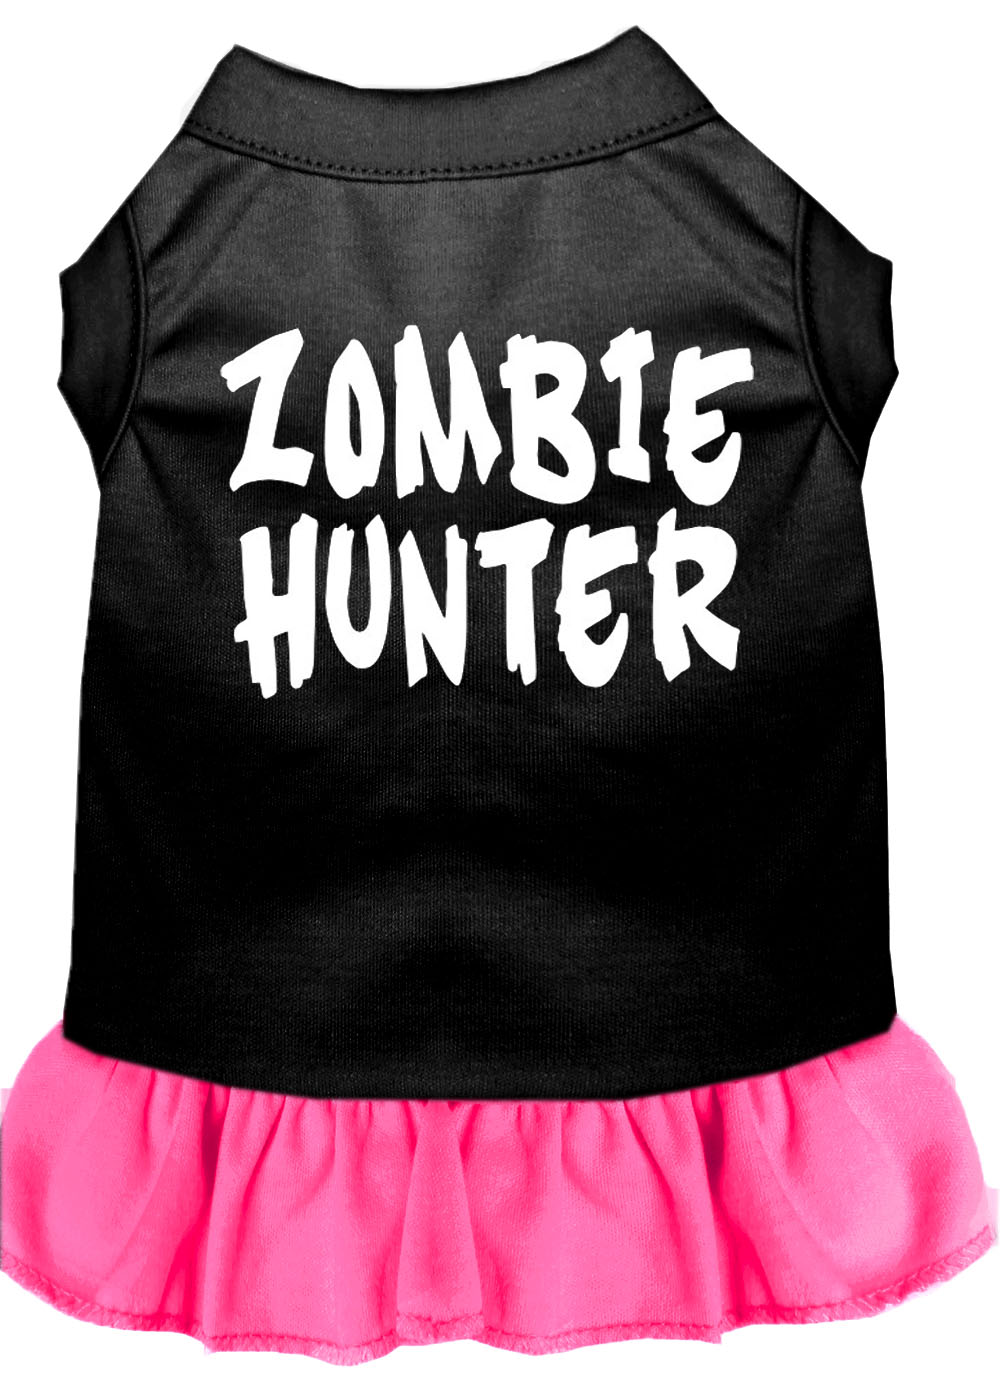 Zombie Hunter Screen Print Dress Black with Bright Pink Med